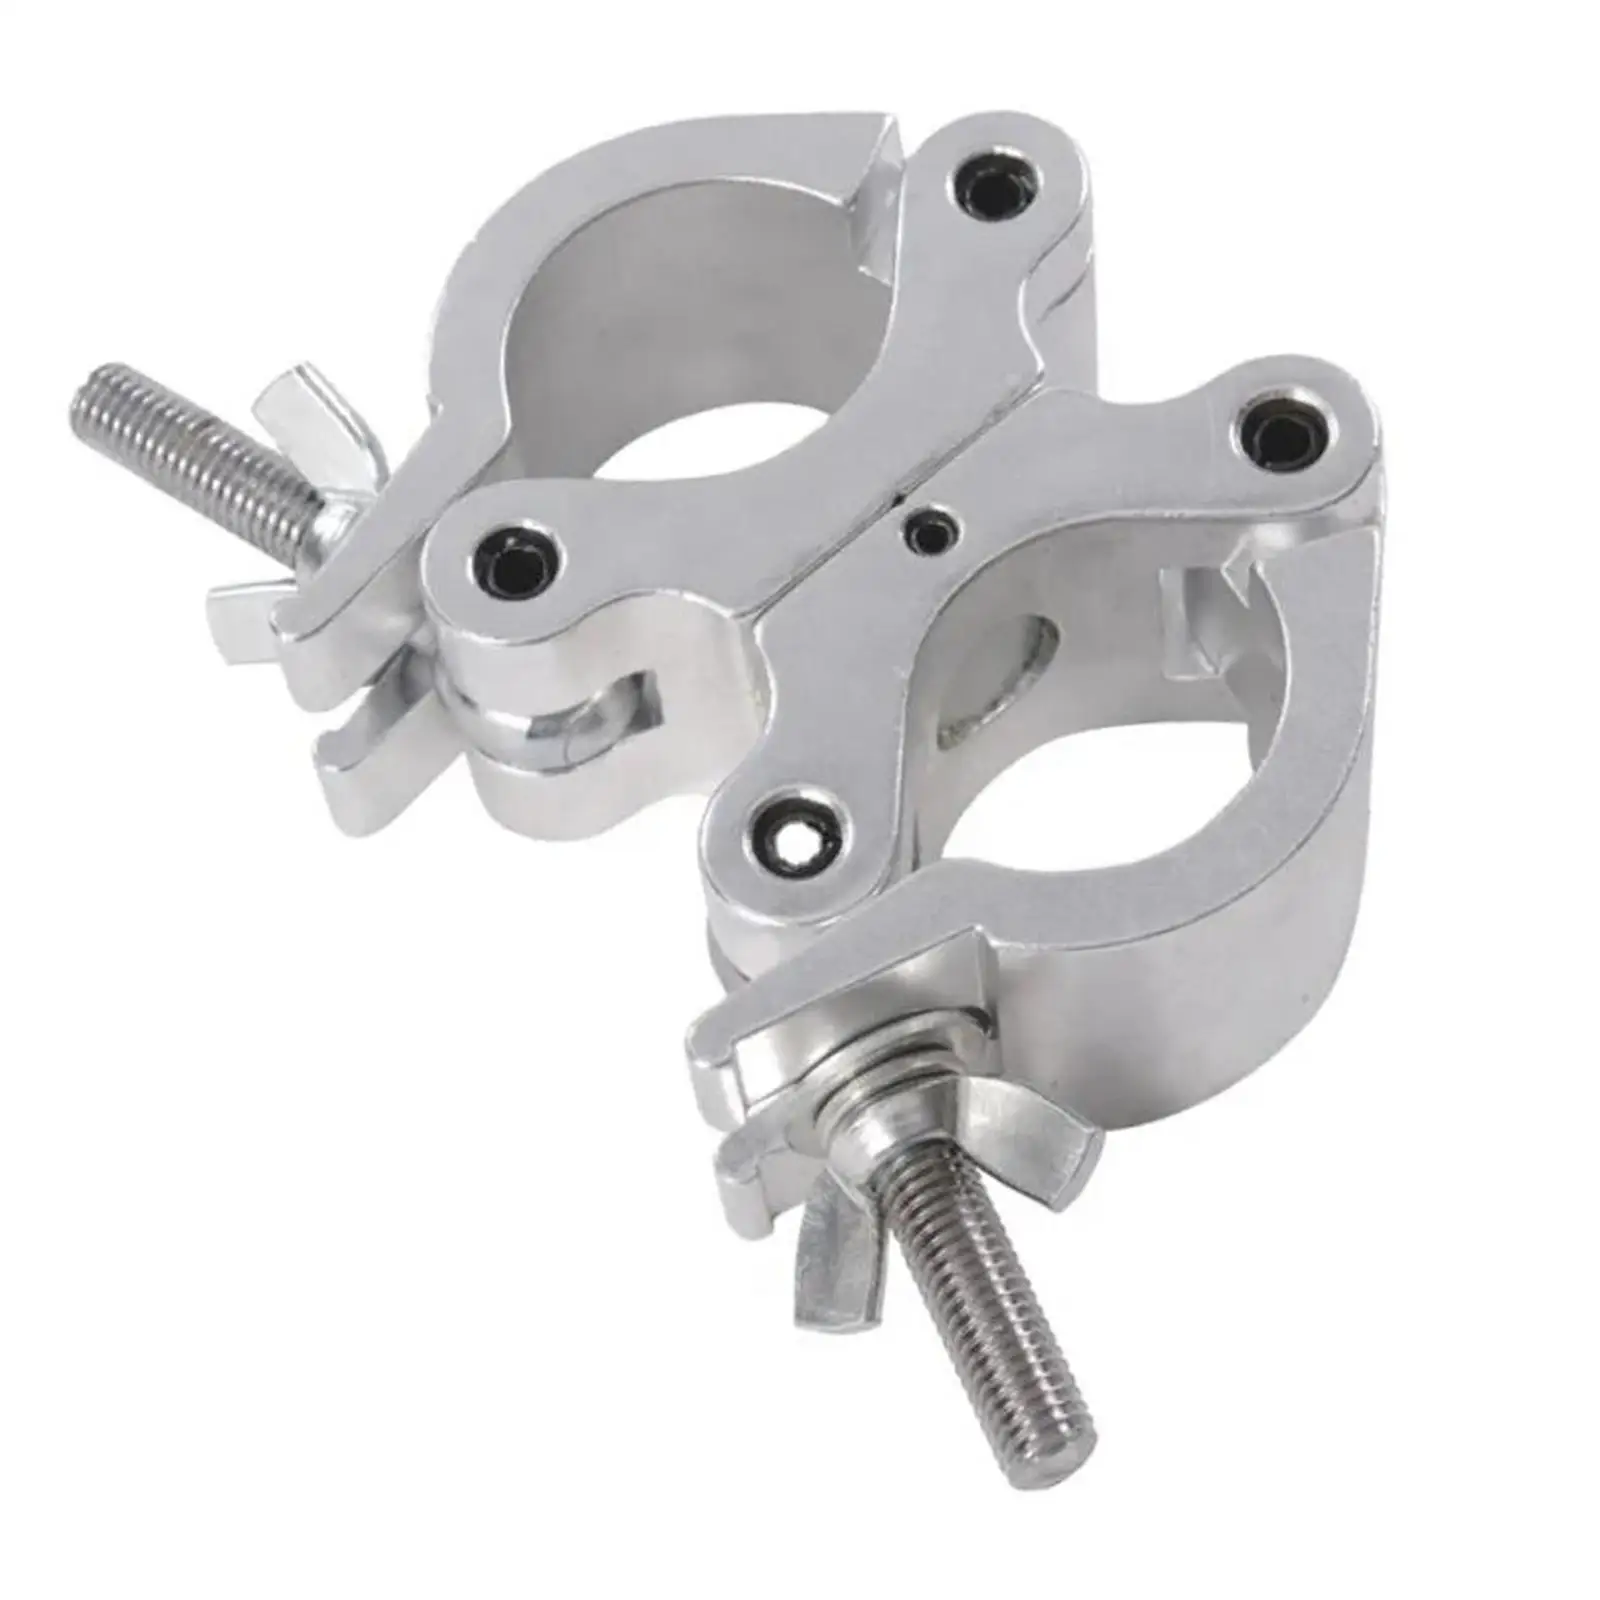 DJ Light Clamps Dual Swivel Clamp for Od 32-35mm Tube Accessories Durable